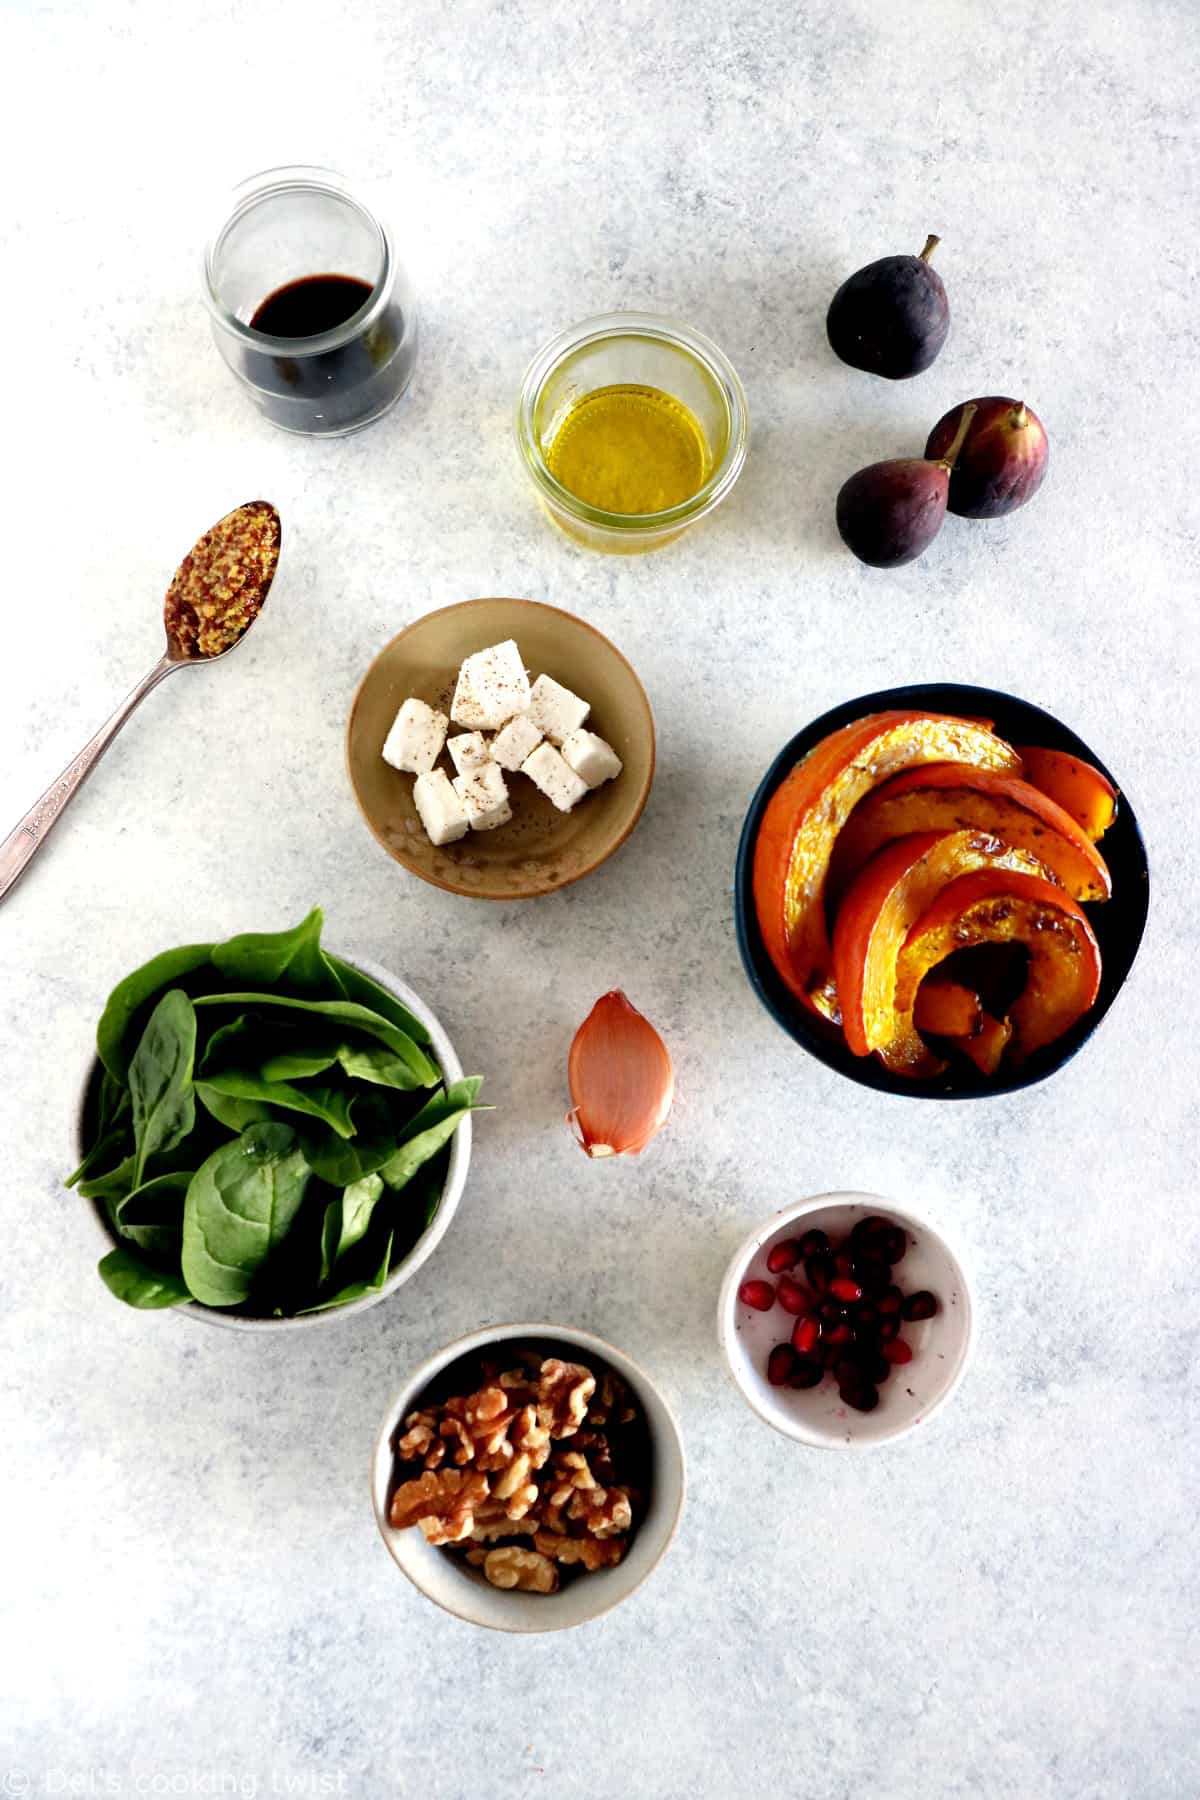 Ingredients For Roasted Squash Fig and Spinach Salad